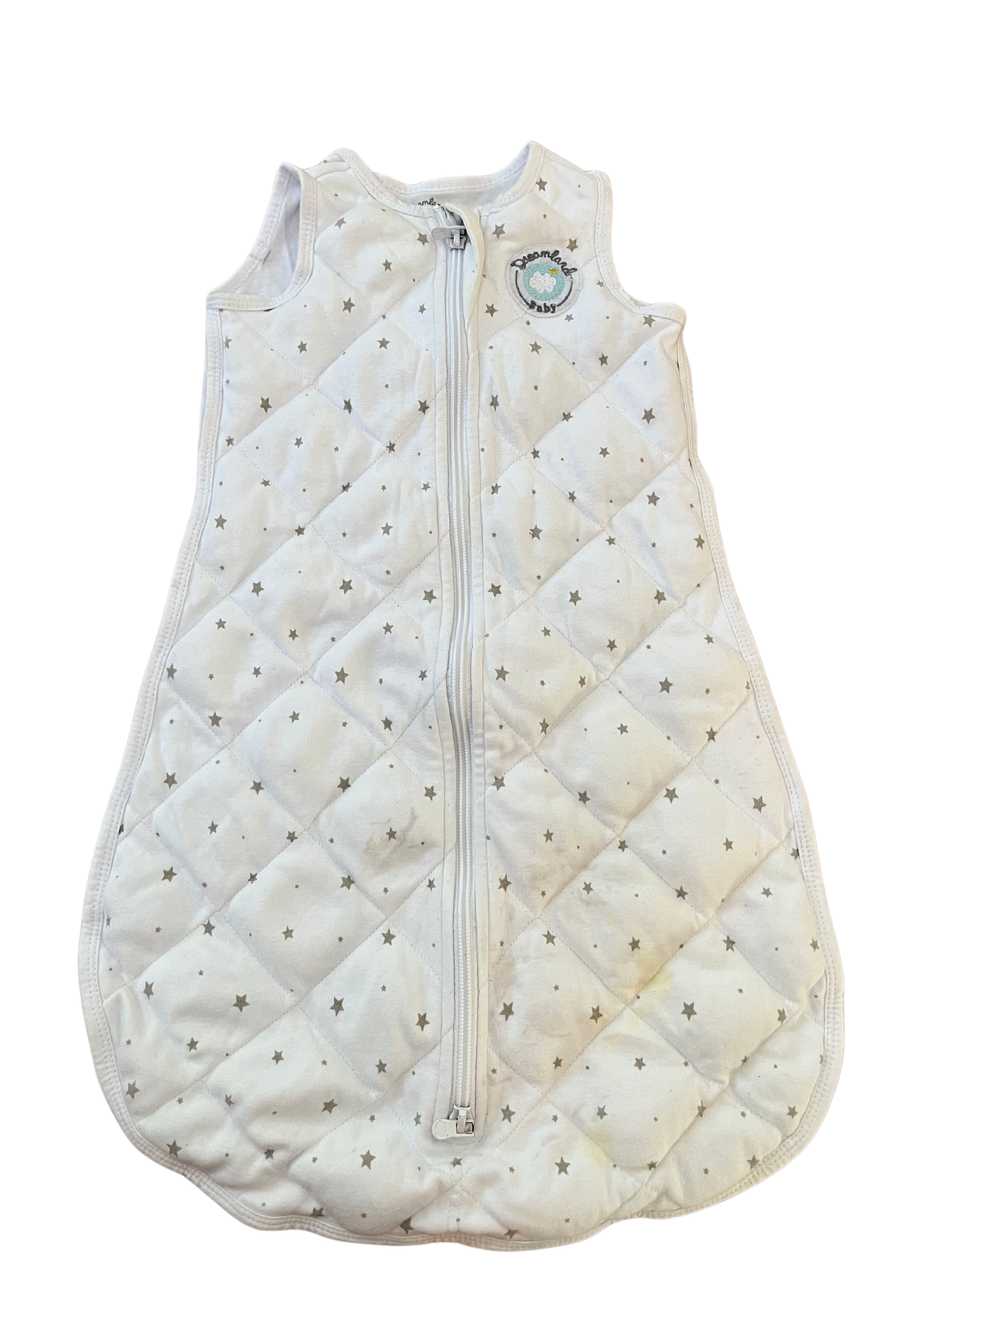 Dreamland Baby Dream Weighted Sack - image 2